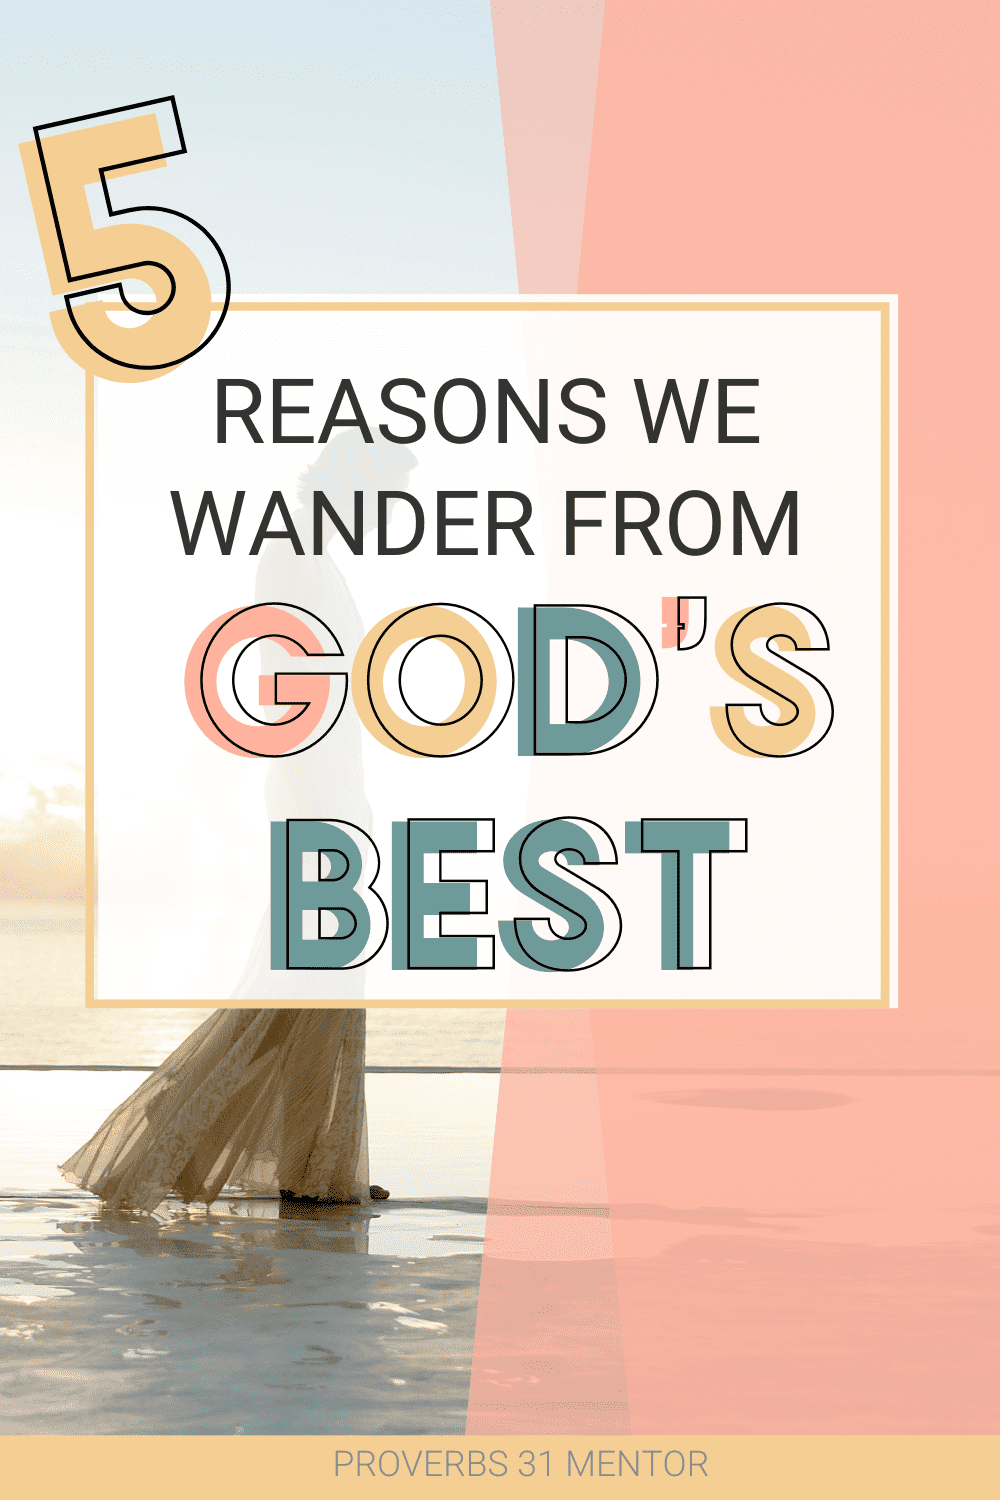 Title- 5 Reasons we wander away from God's best picture- woman walking on the beach